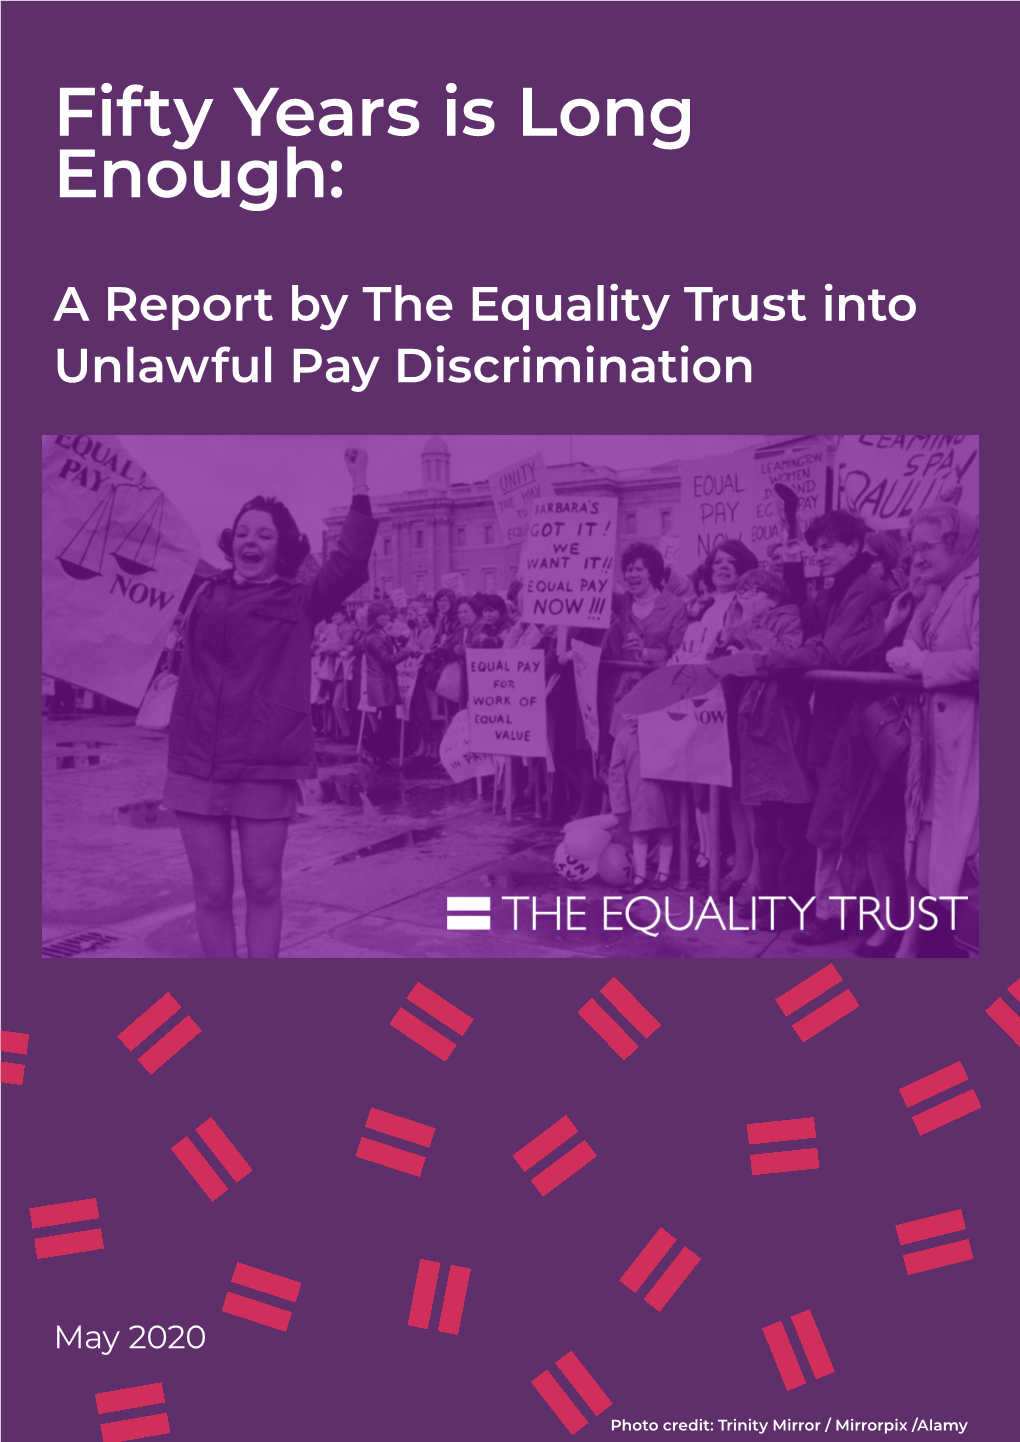 A Report by the Equality Trust Into Unlawful Pay Discrimination